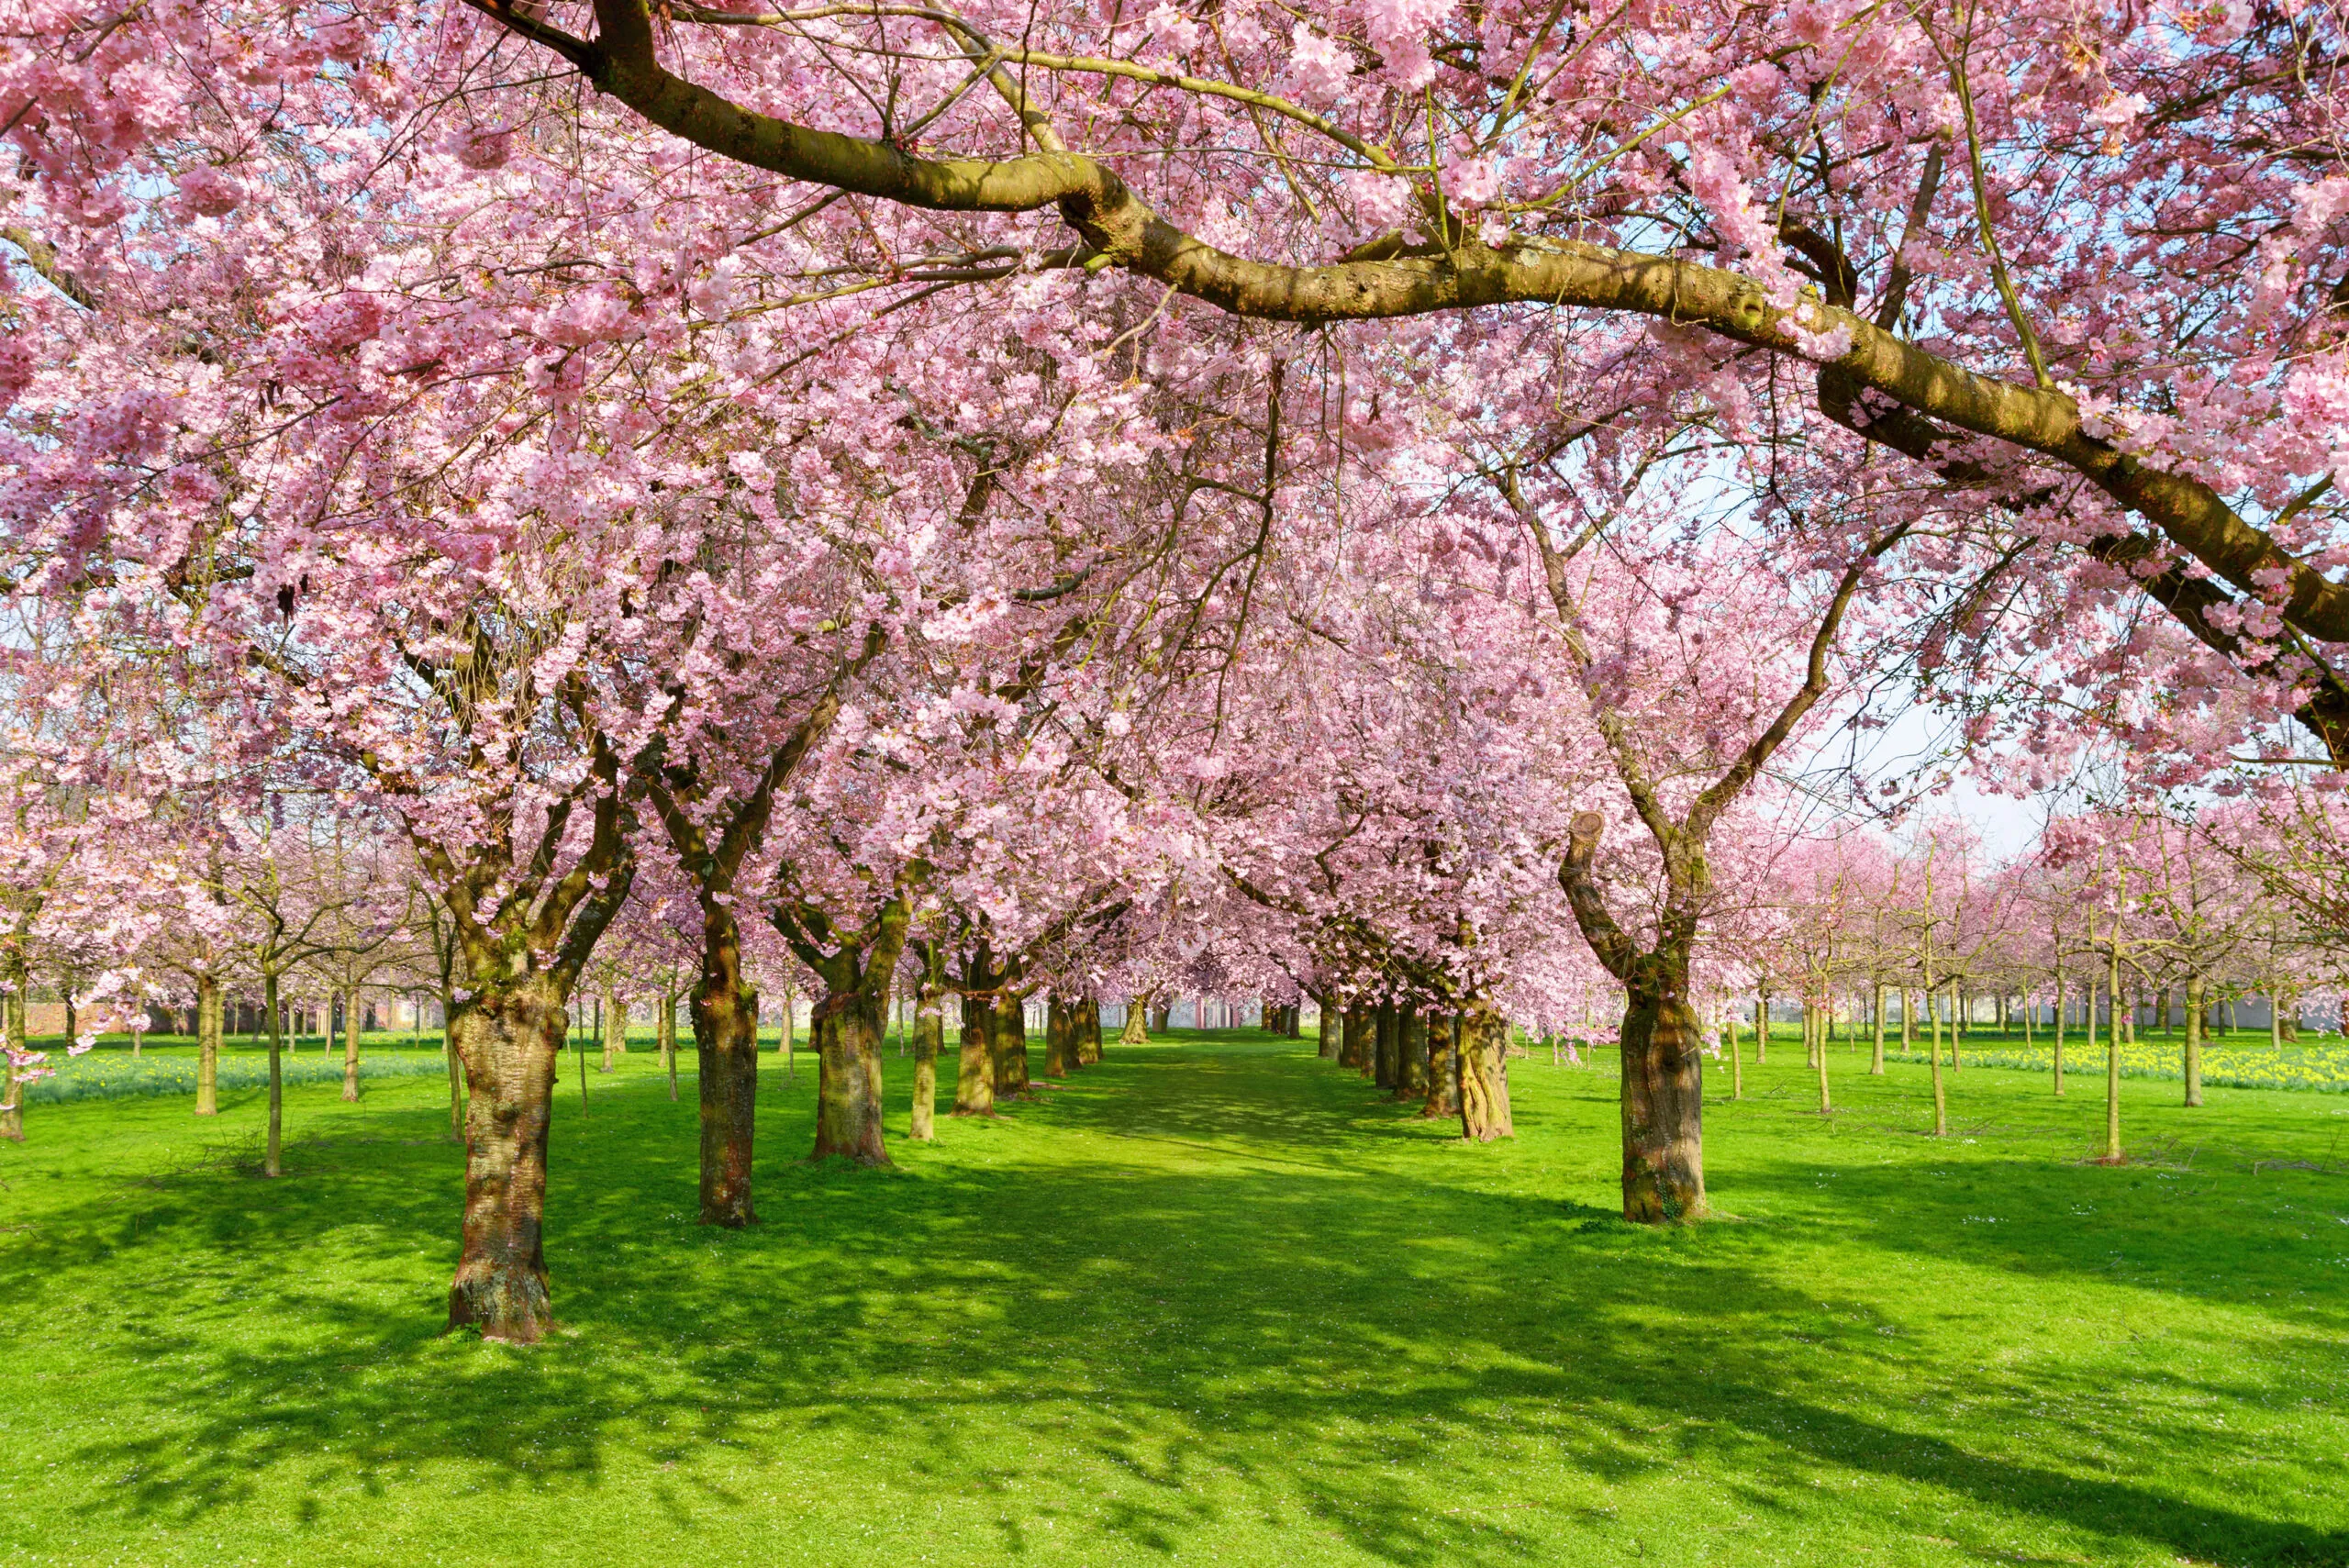 Scenic,Park,With,Rows,Of,Blossoming,Cherry,Trees,In,Spring